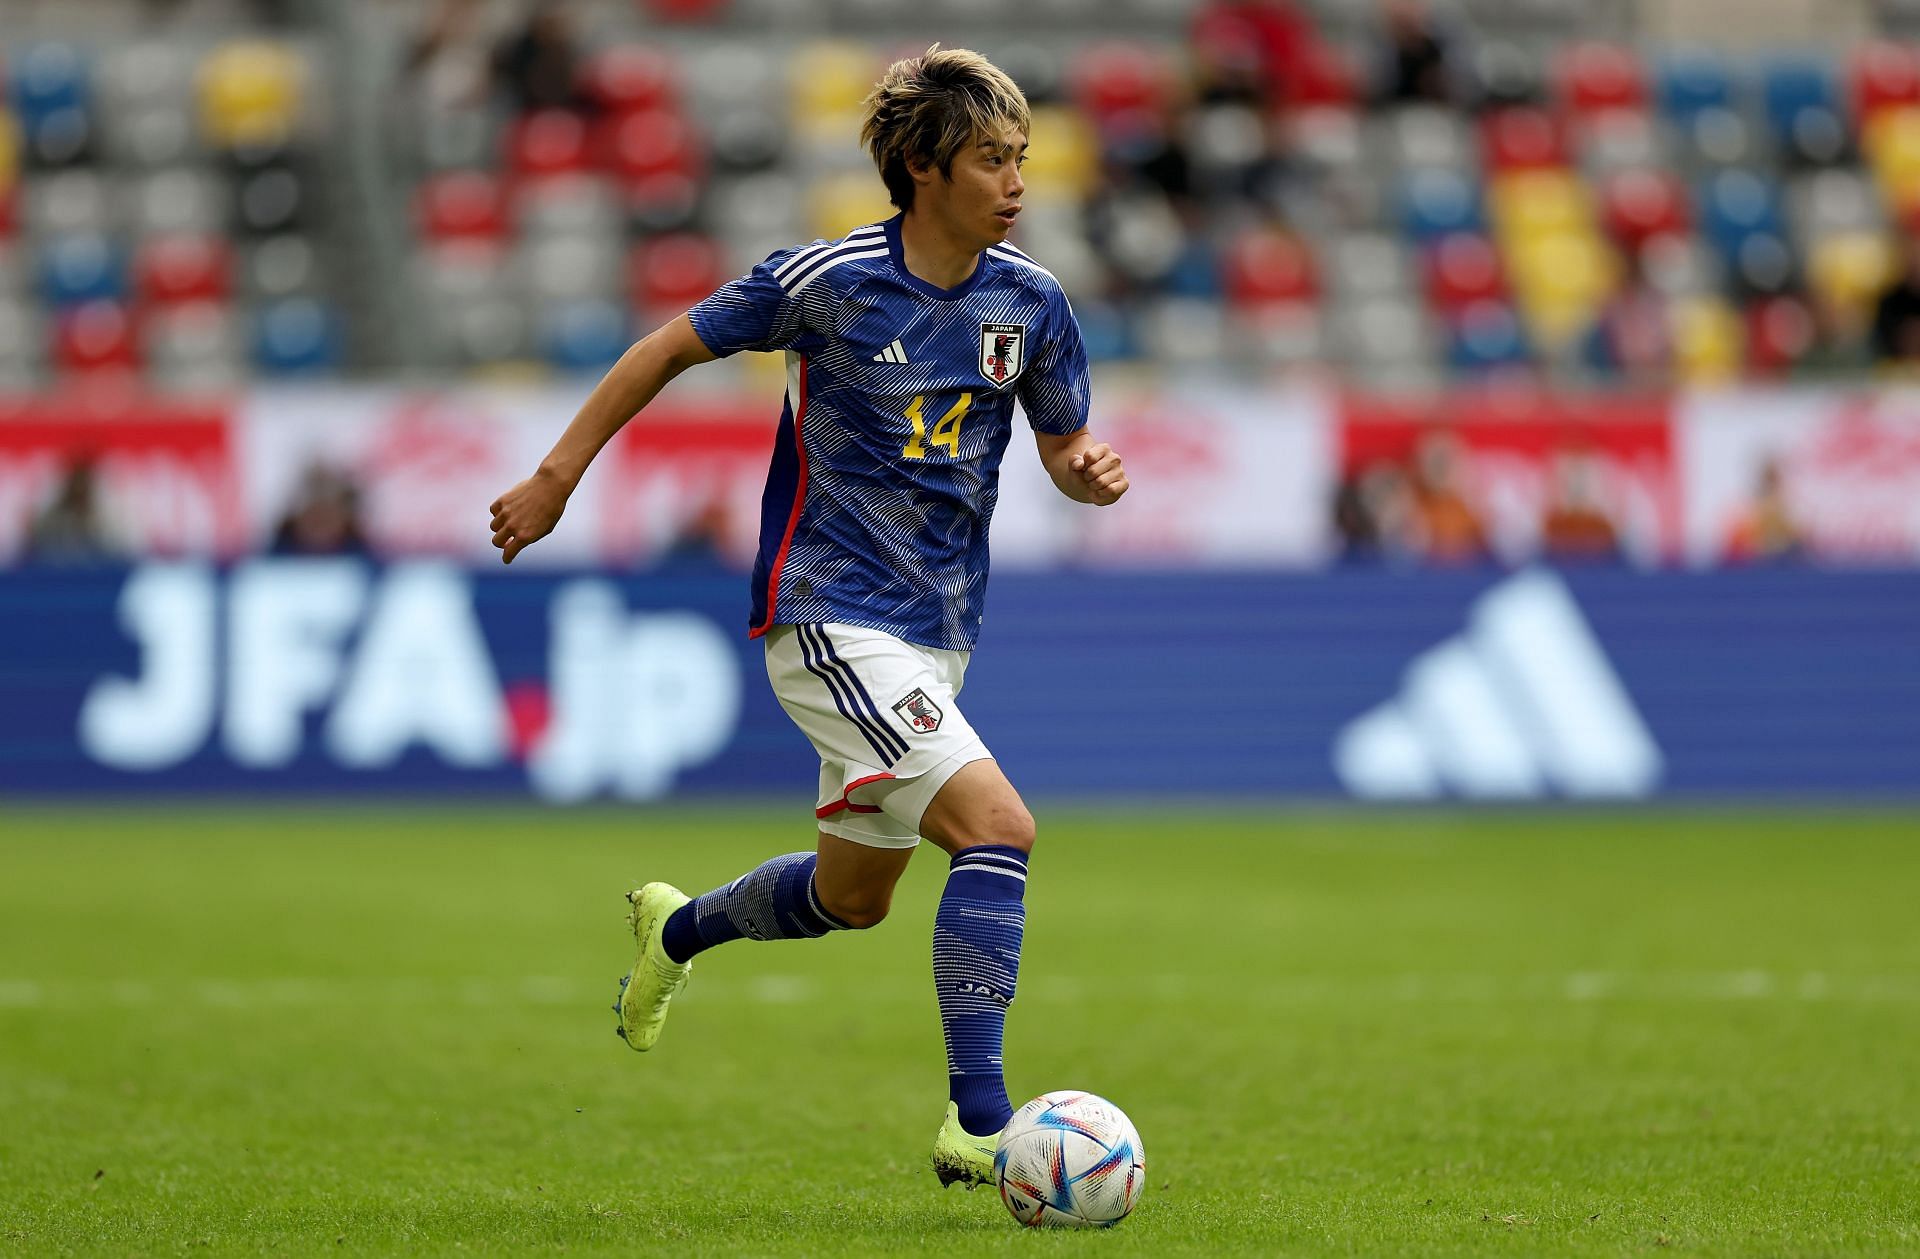 Ito playing for his country Japan